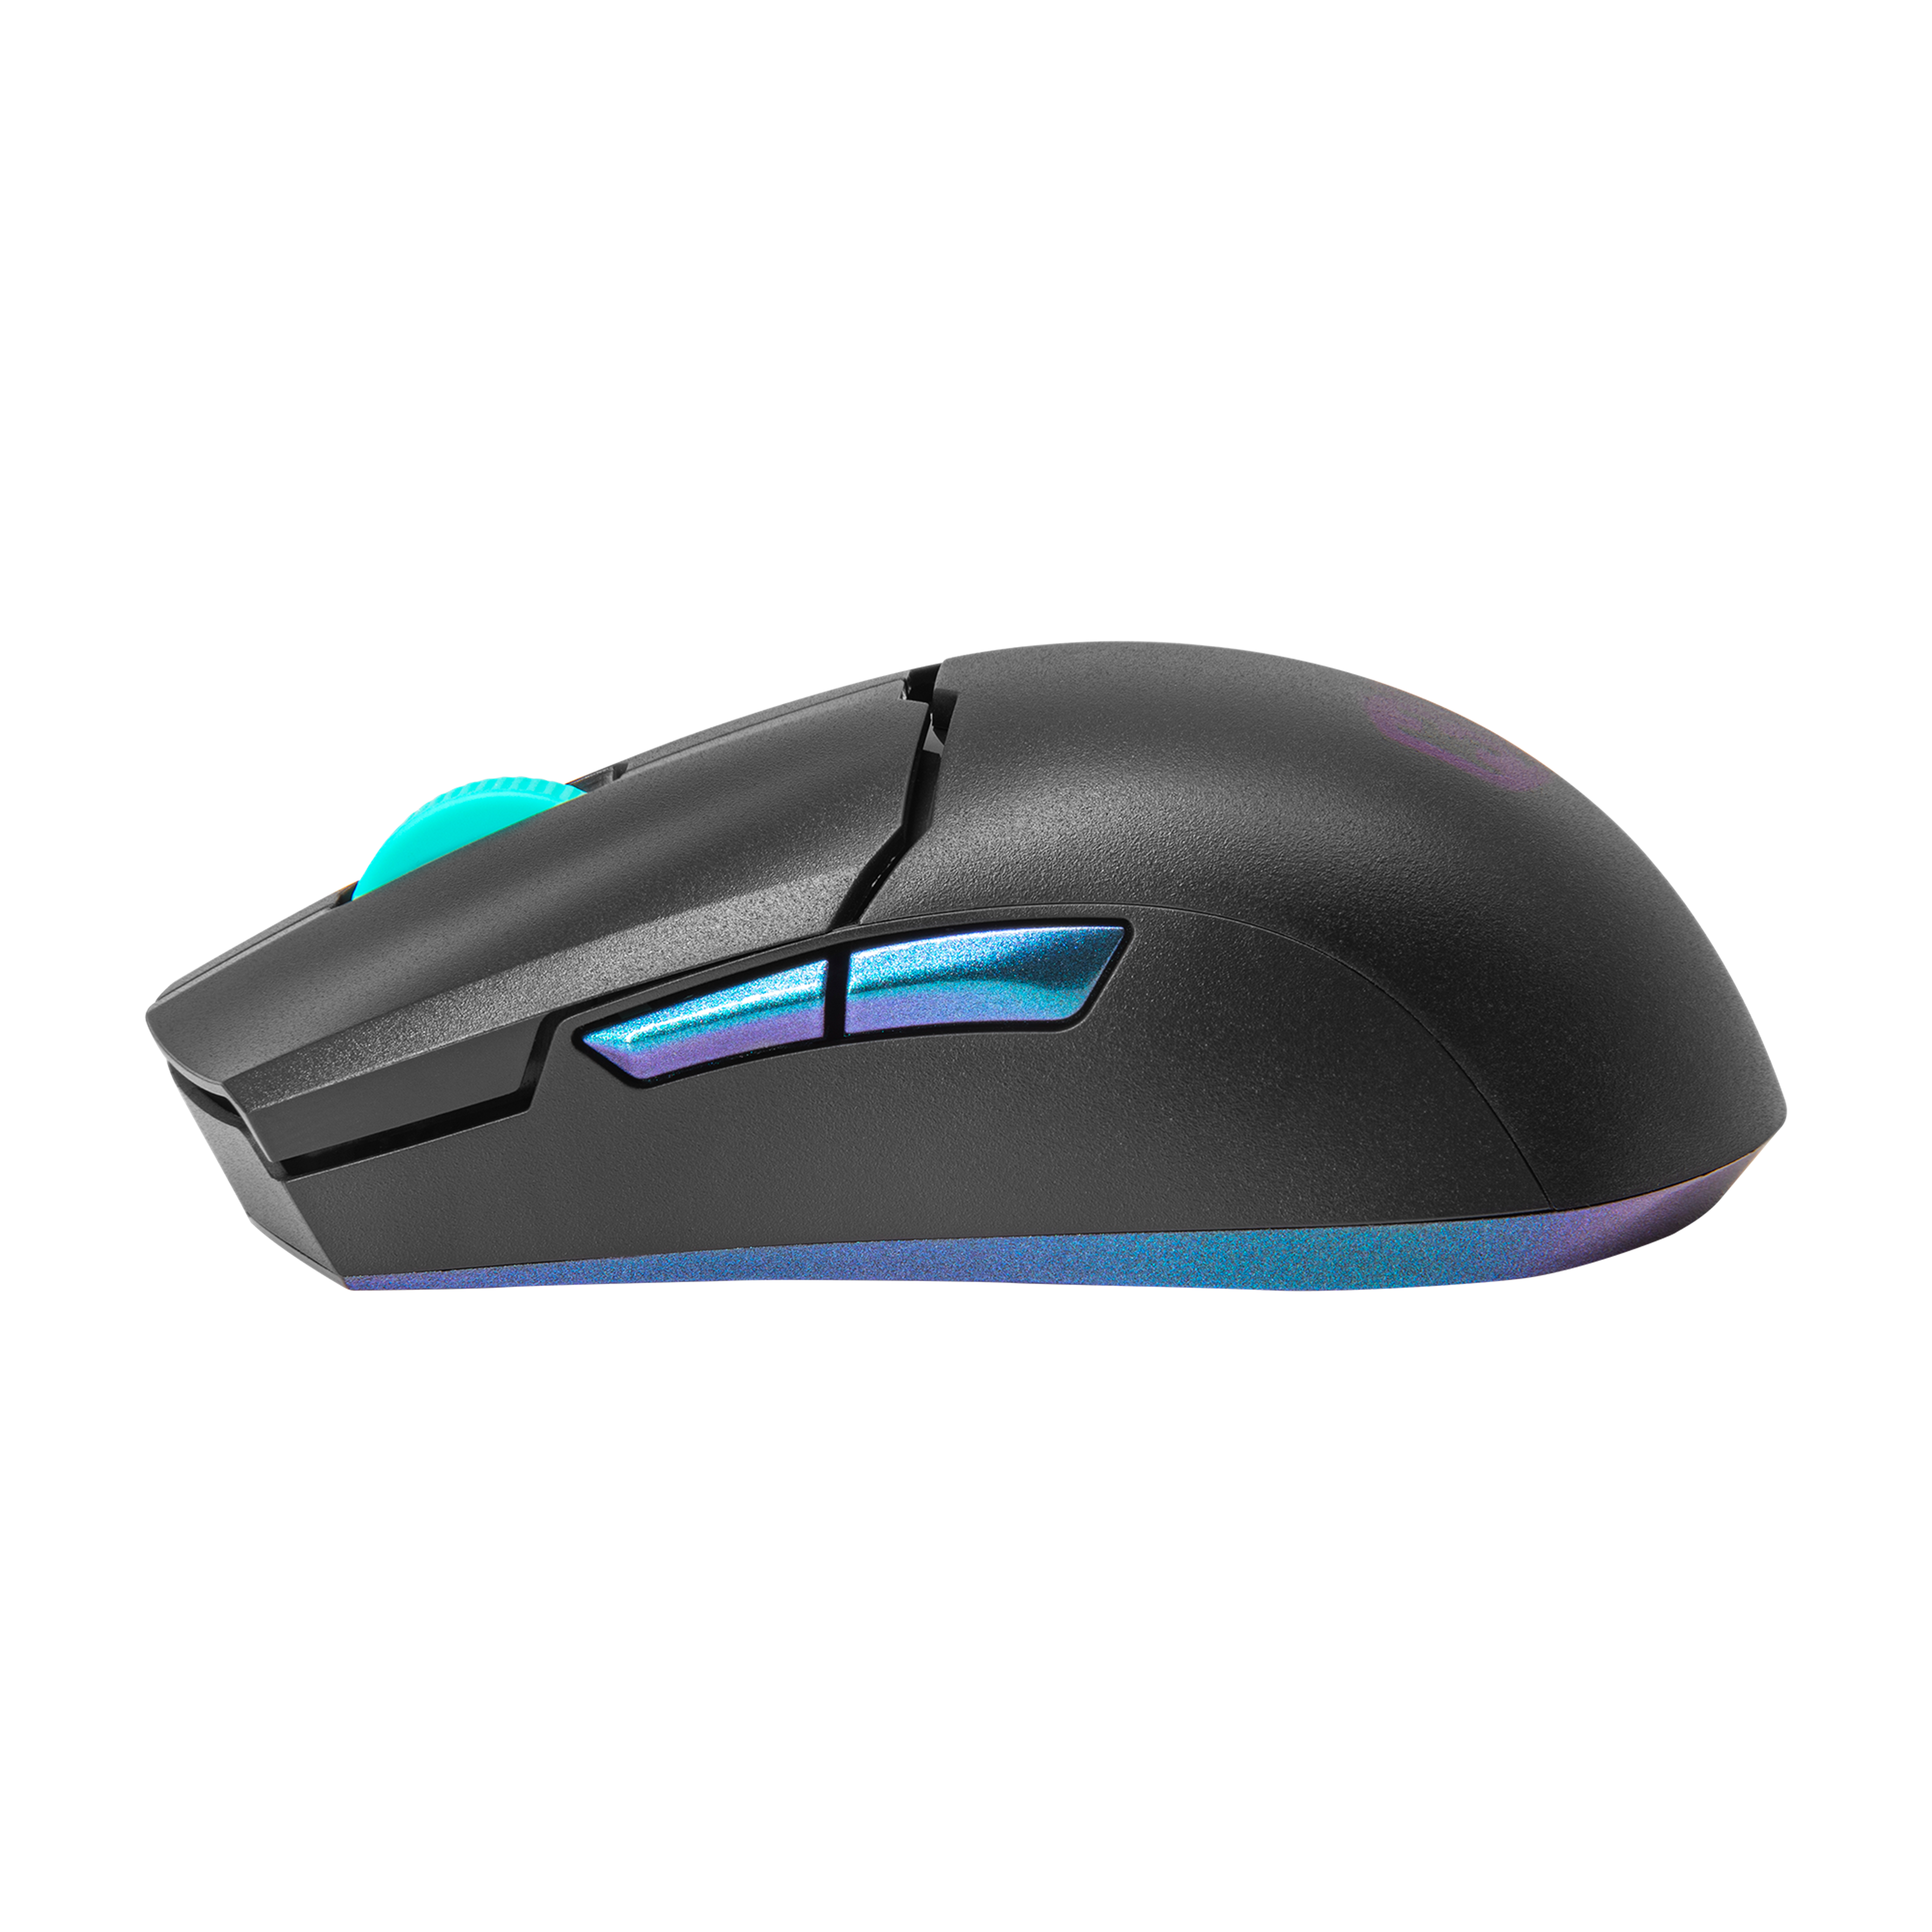 MM712 30th Anniversary Edition Gaming Mouse | Cooler Master